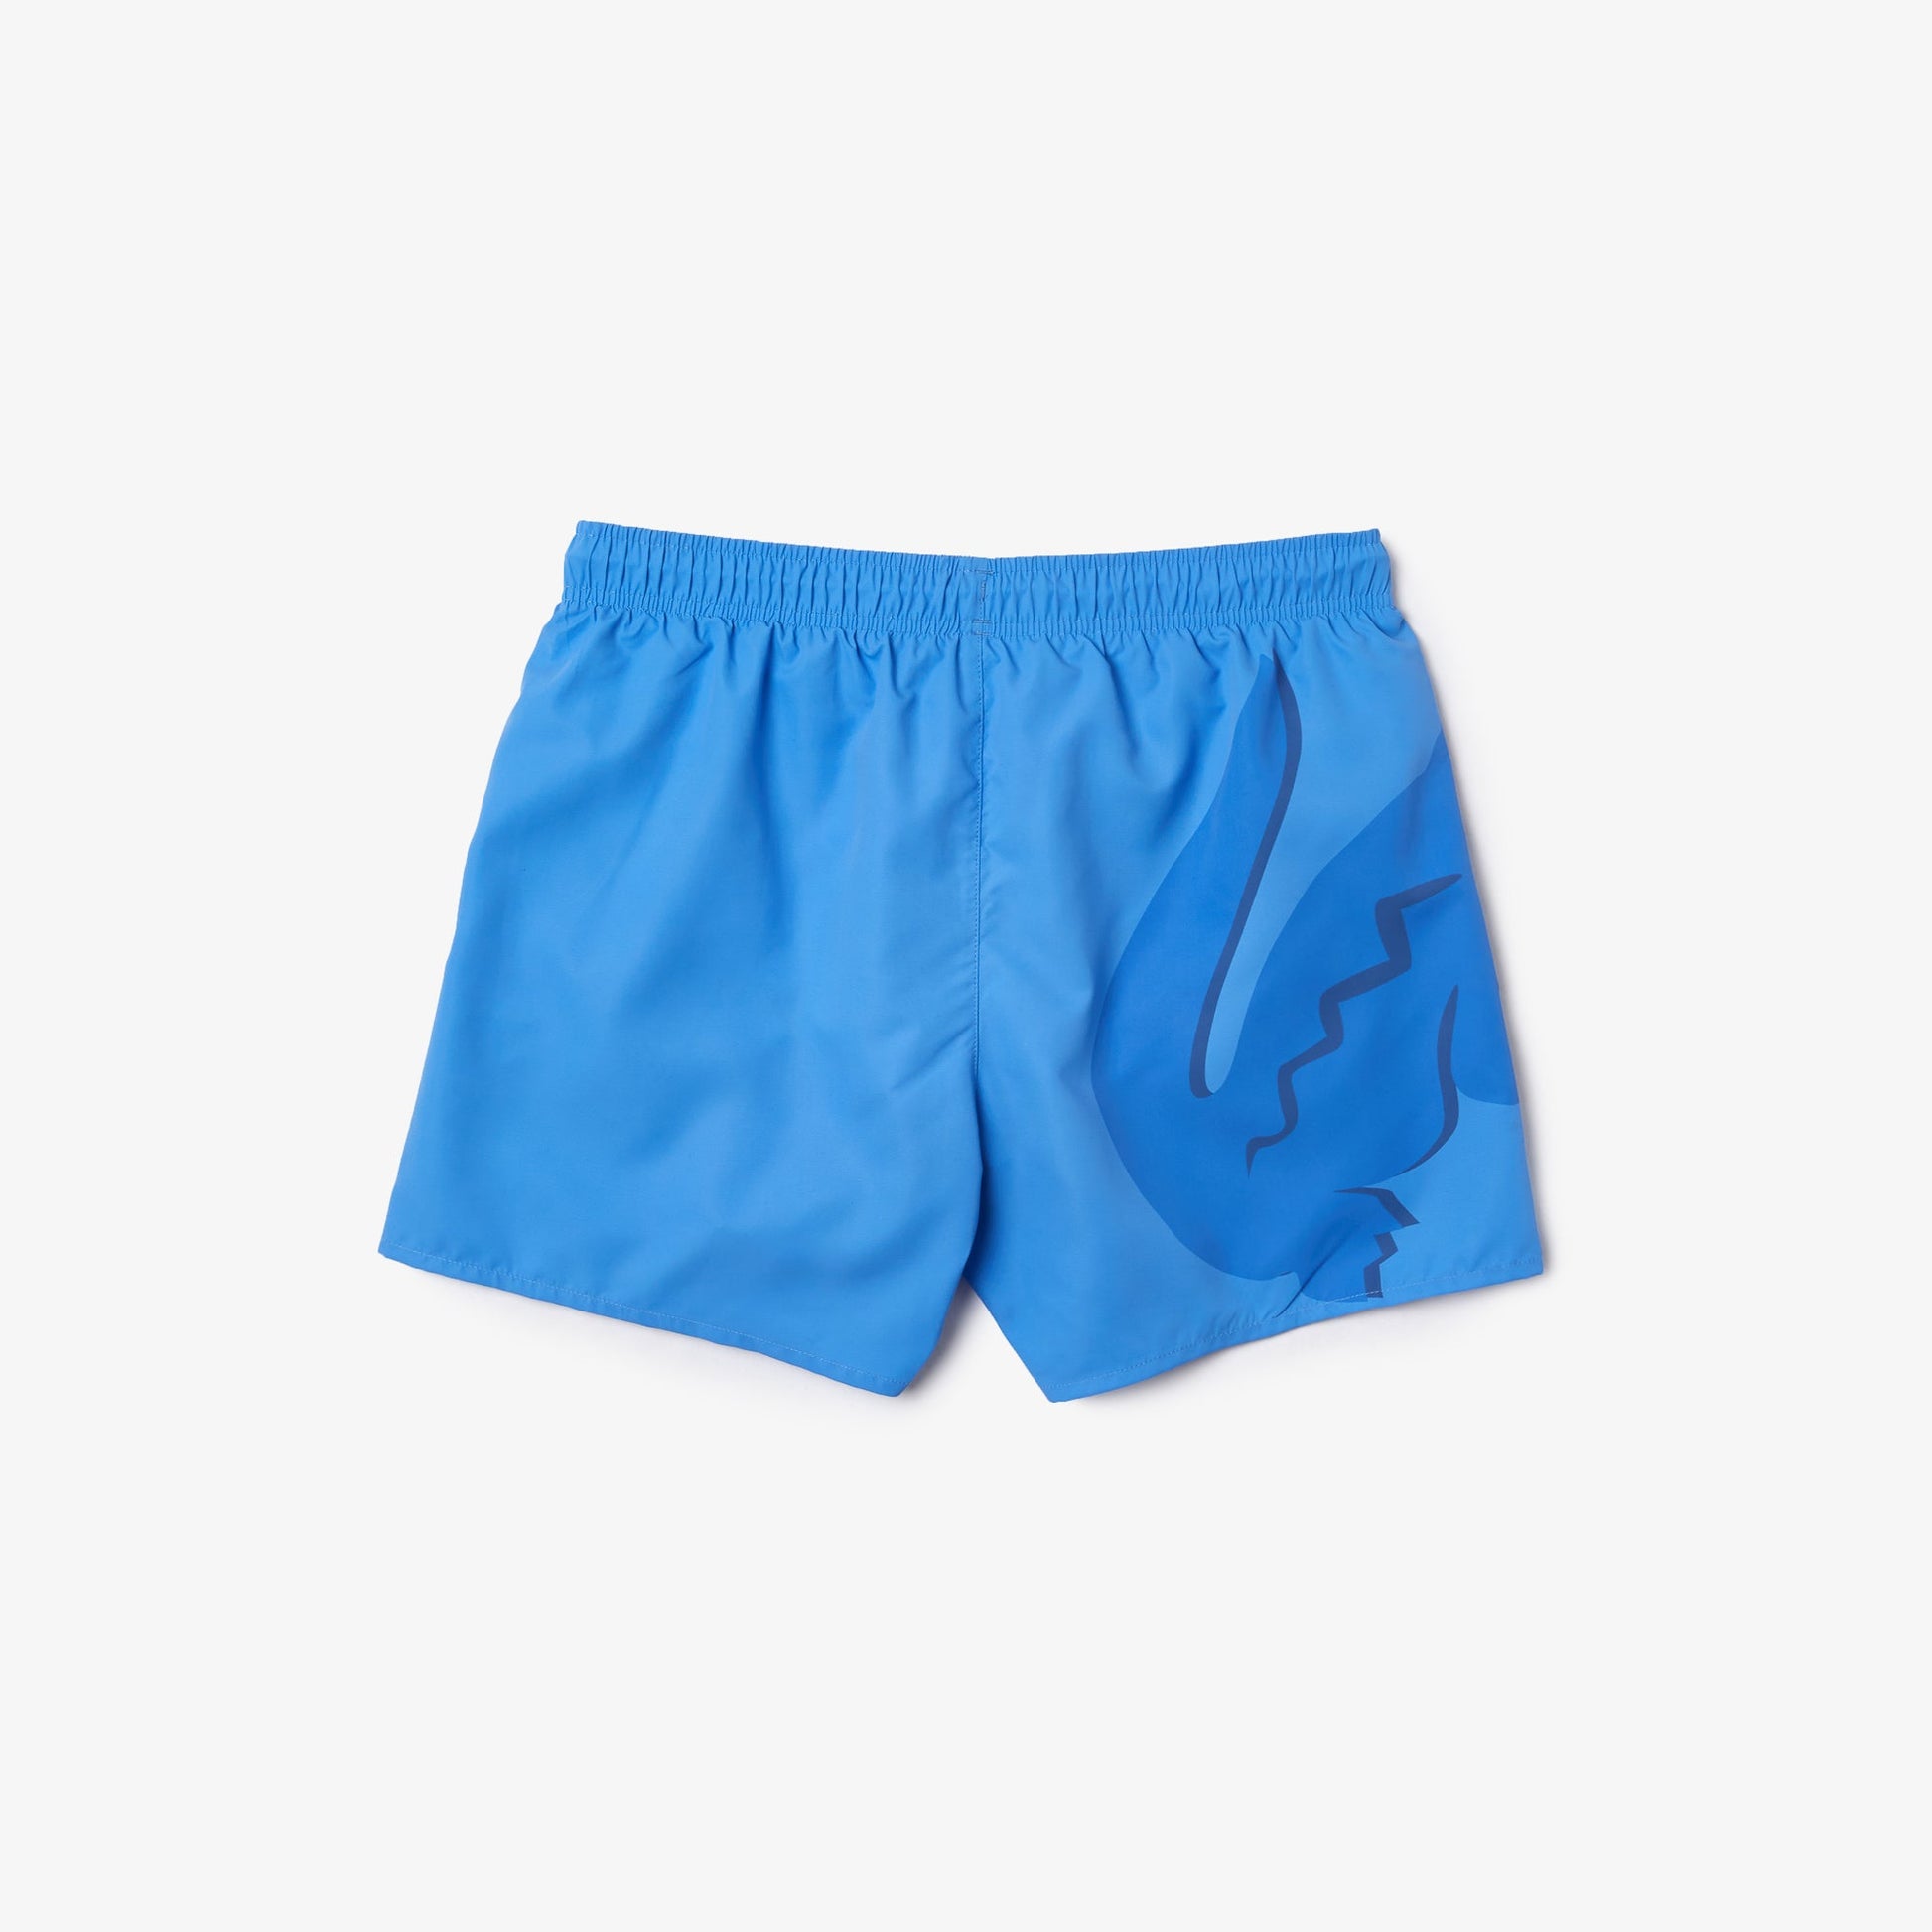 Shop The Latest Collection Of Lacoste Men'S Crocodile Built-In Mesh Boxer Swimming Trunks - Mh2732 In Lebanon